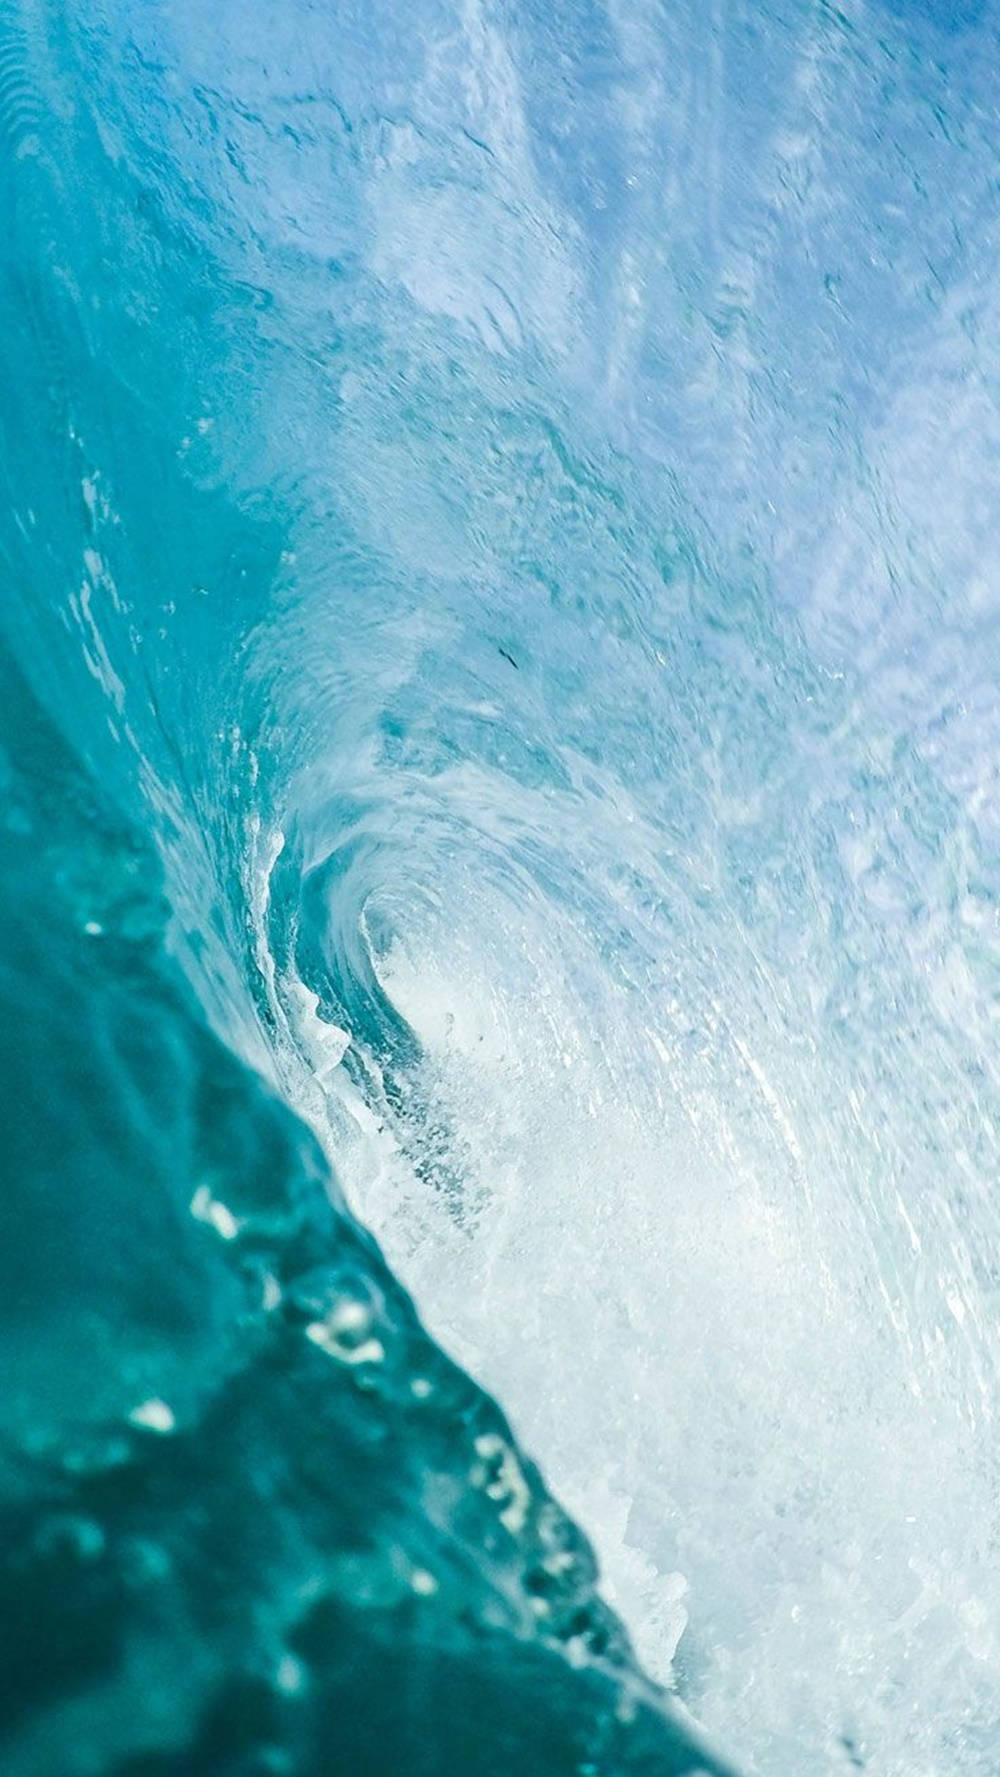 Soak in the beauty of the ocean with the latest iPhone Wallpaper